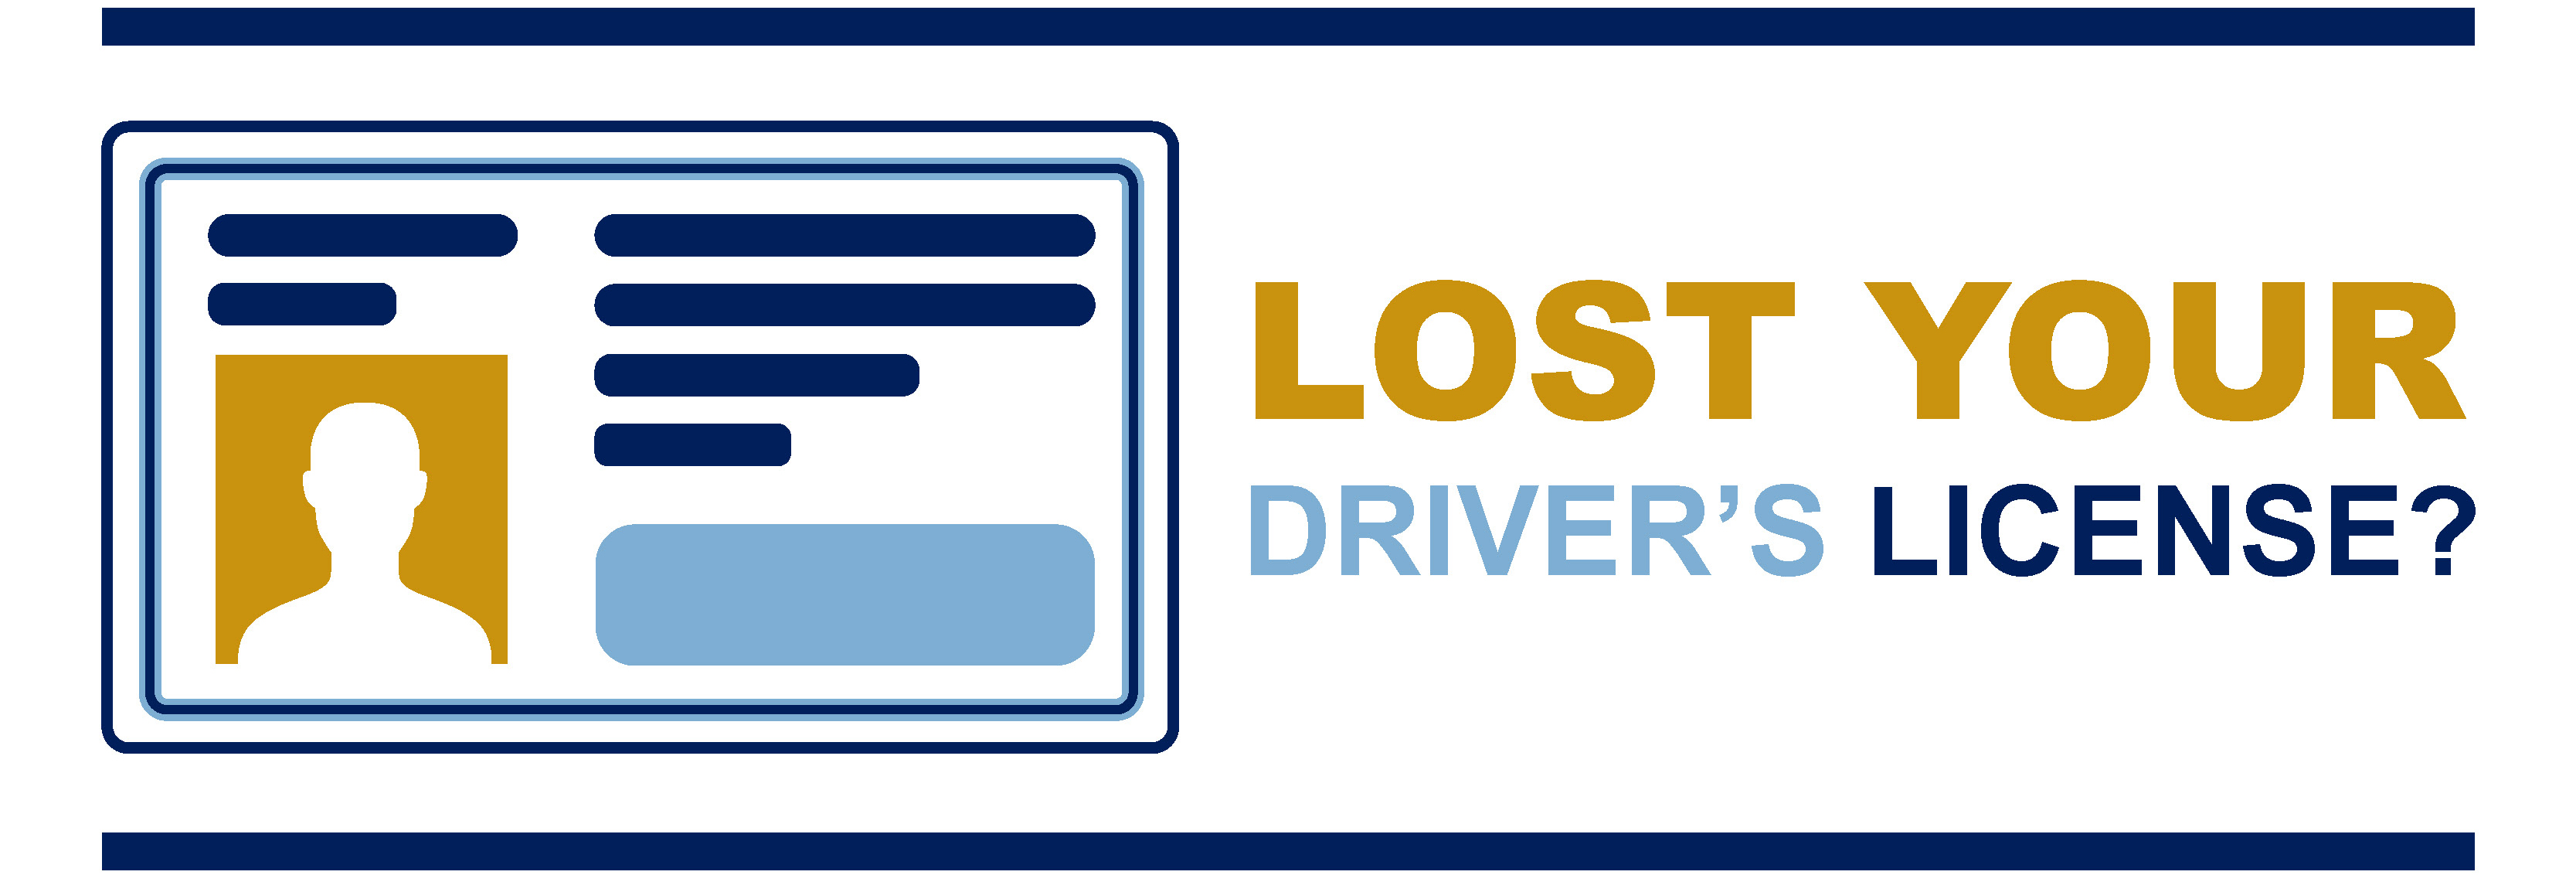 lost your driver's license graphic